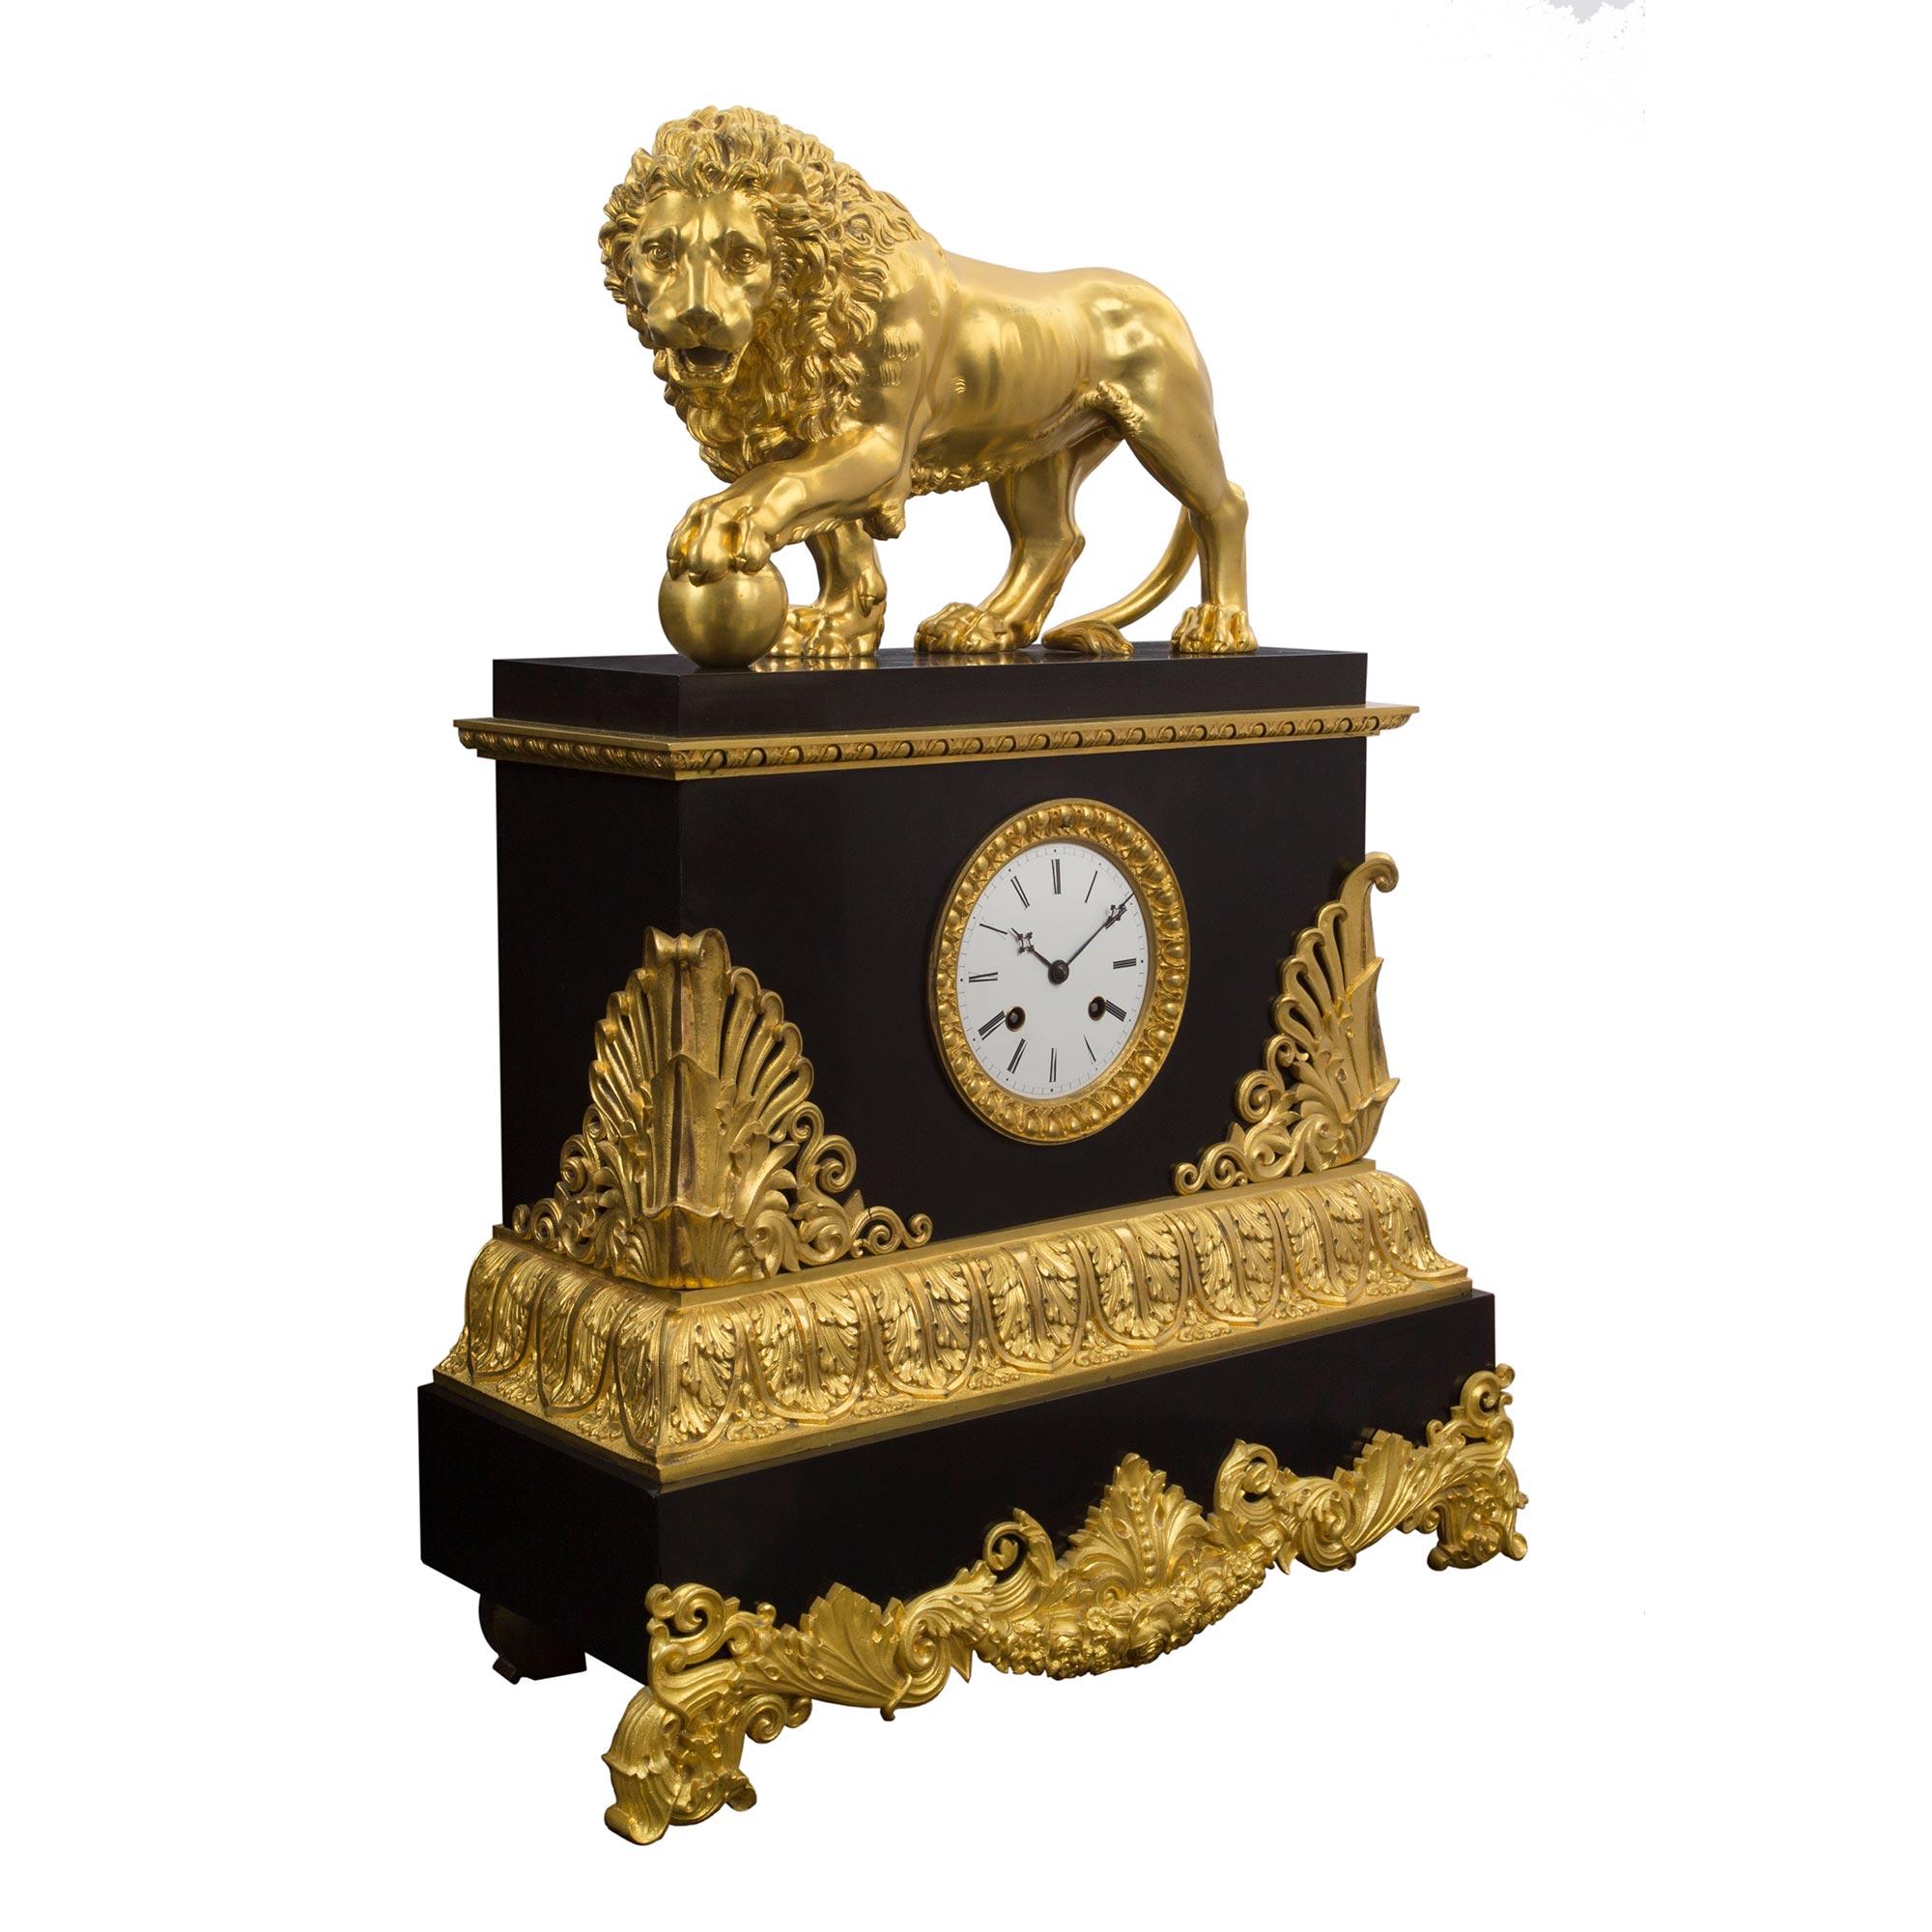 A sensational and important three piece French 19th century Neo-Classical st. black Belgian marble and ormolu garniture set. The clock is raised by a rectangular marble base with impressive finely chased ormolu mounted supports of scrolling foliage